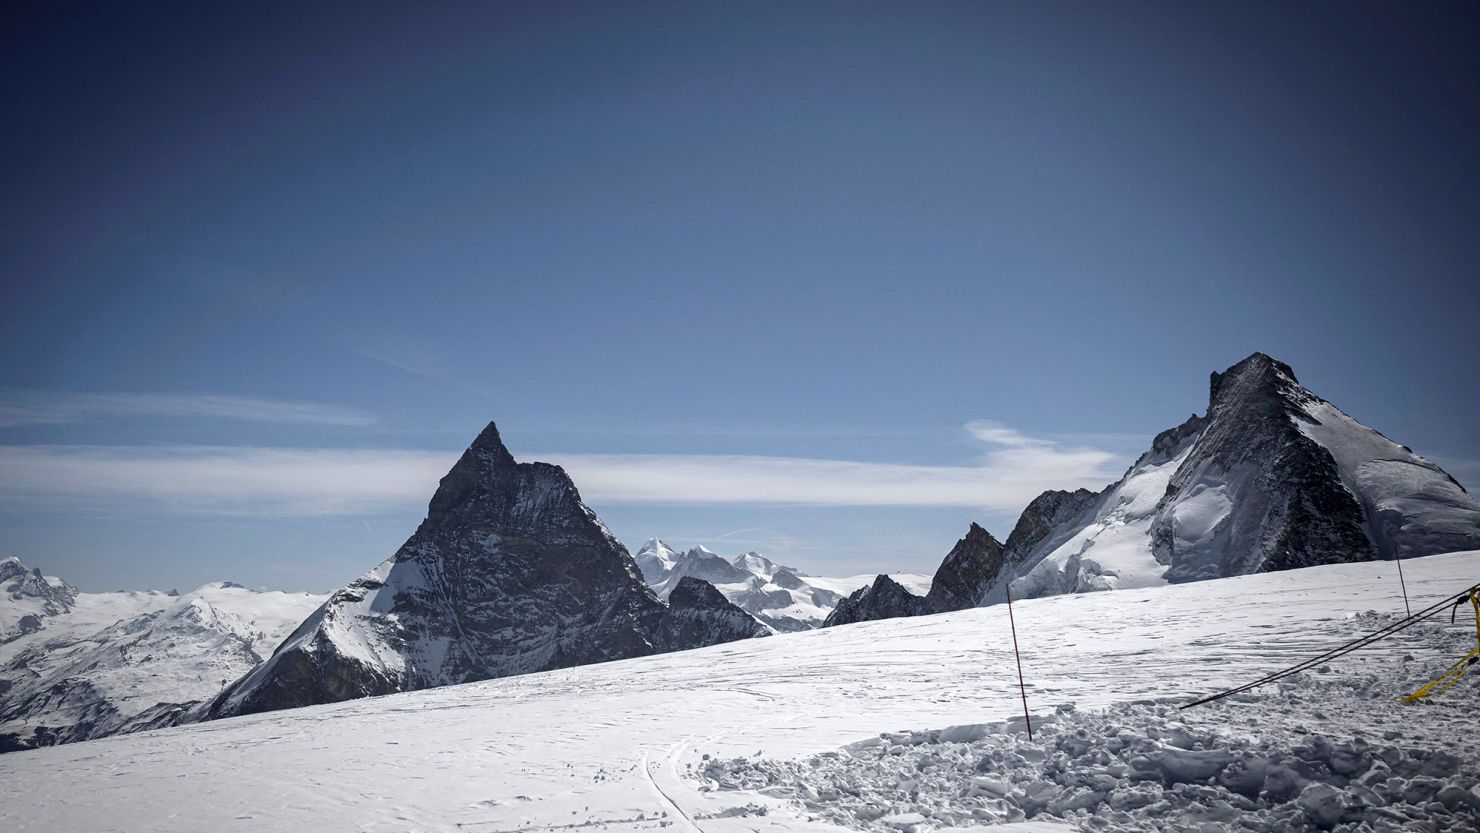 The bodies of five skiers were discovered close to the Tête Blanche high-altitude pass between Zermatt and Arolla.